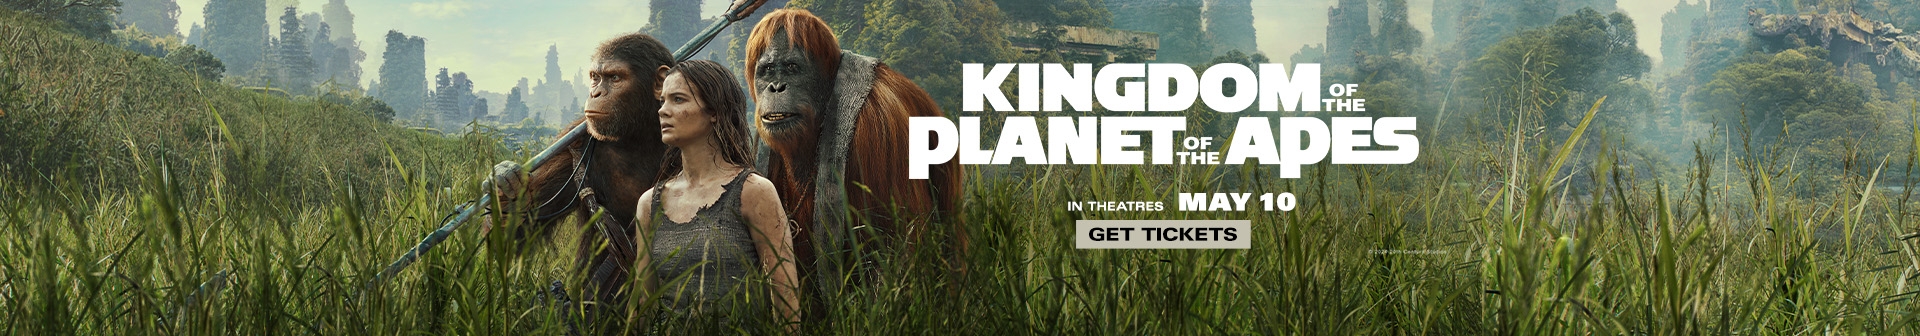 Kingdom of the planet of the apes. In theatres May 10. Get tickets.